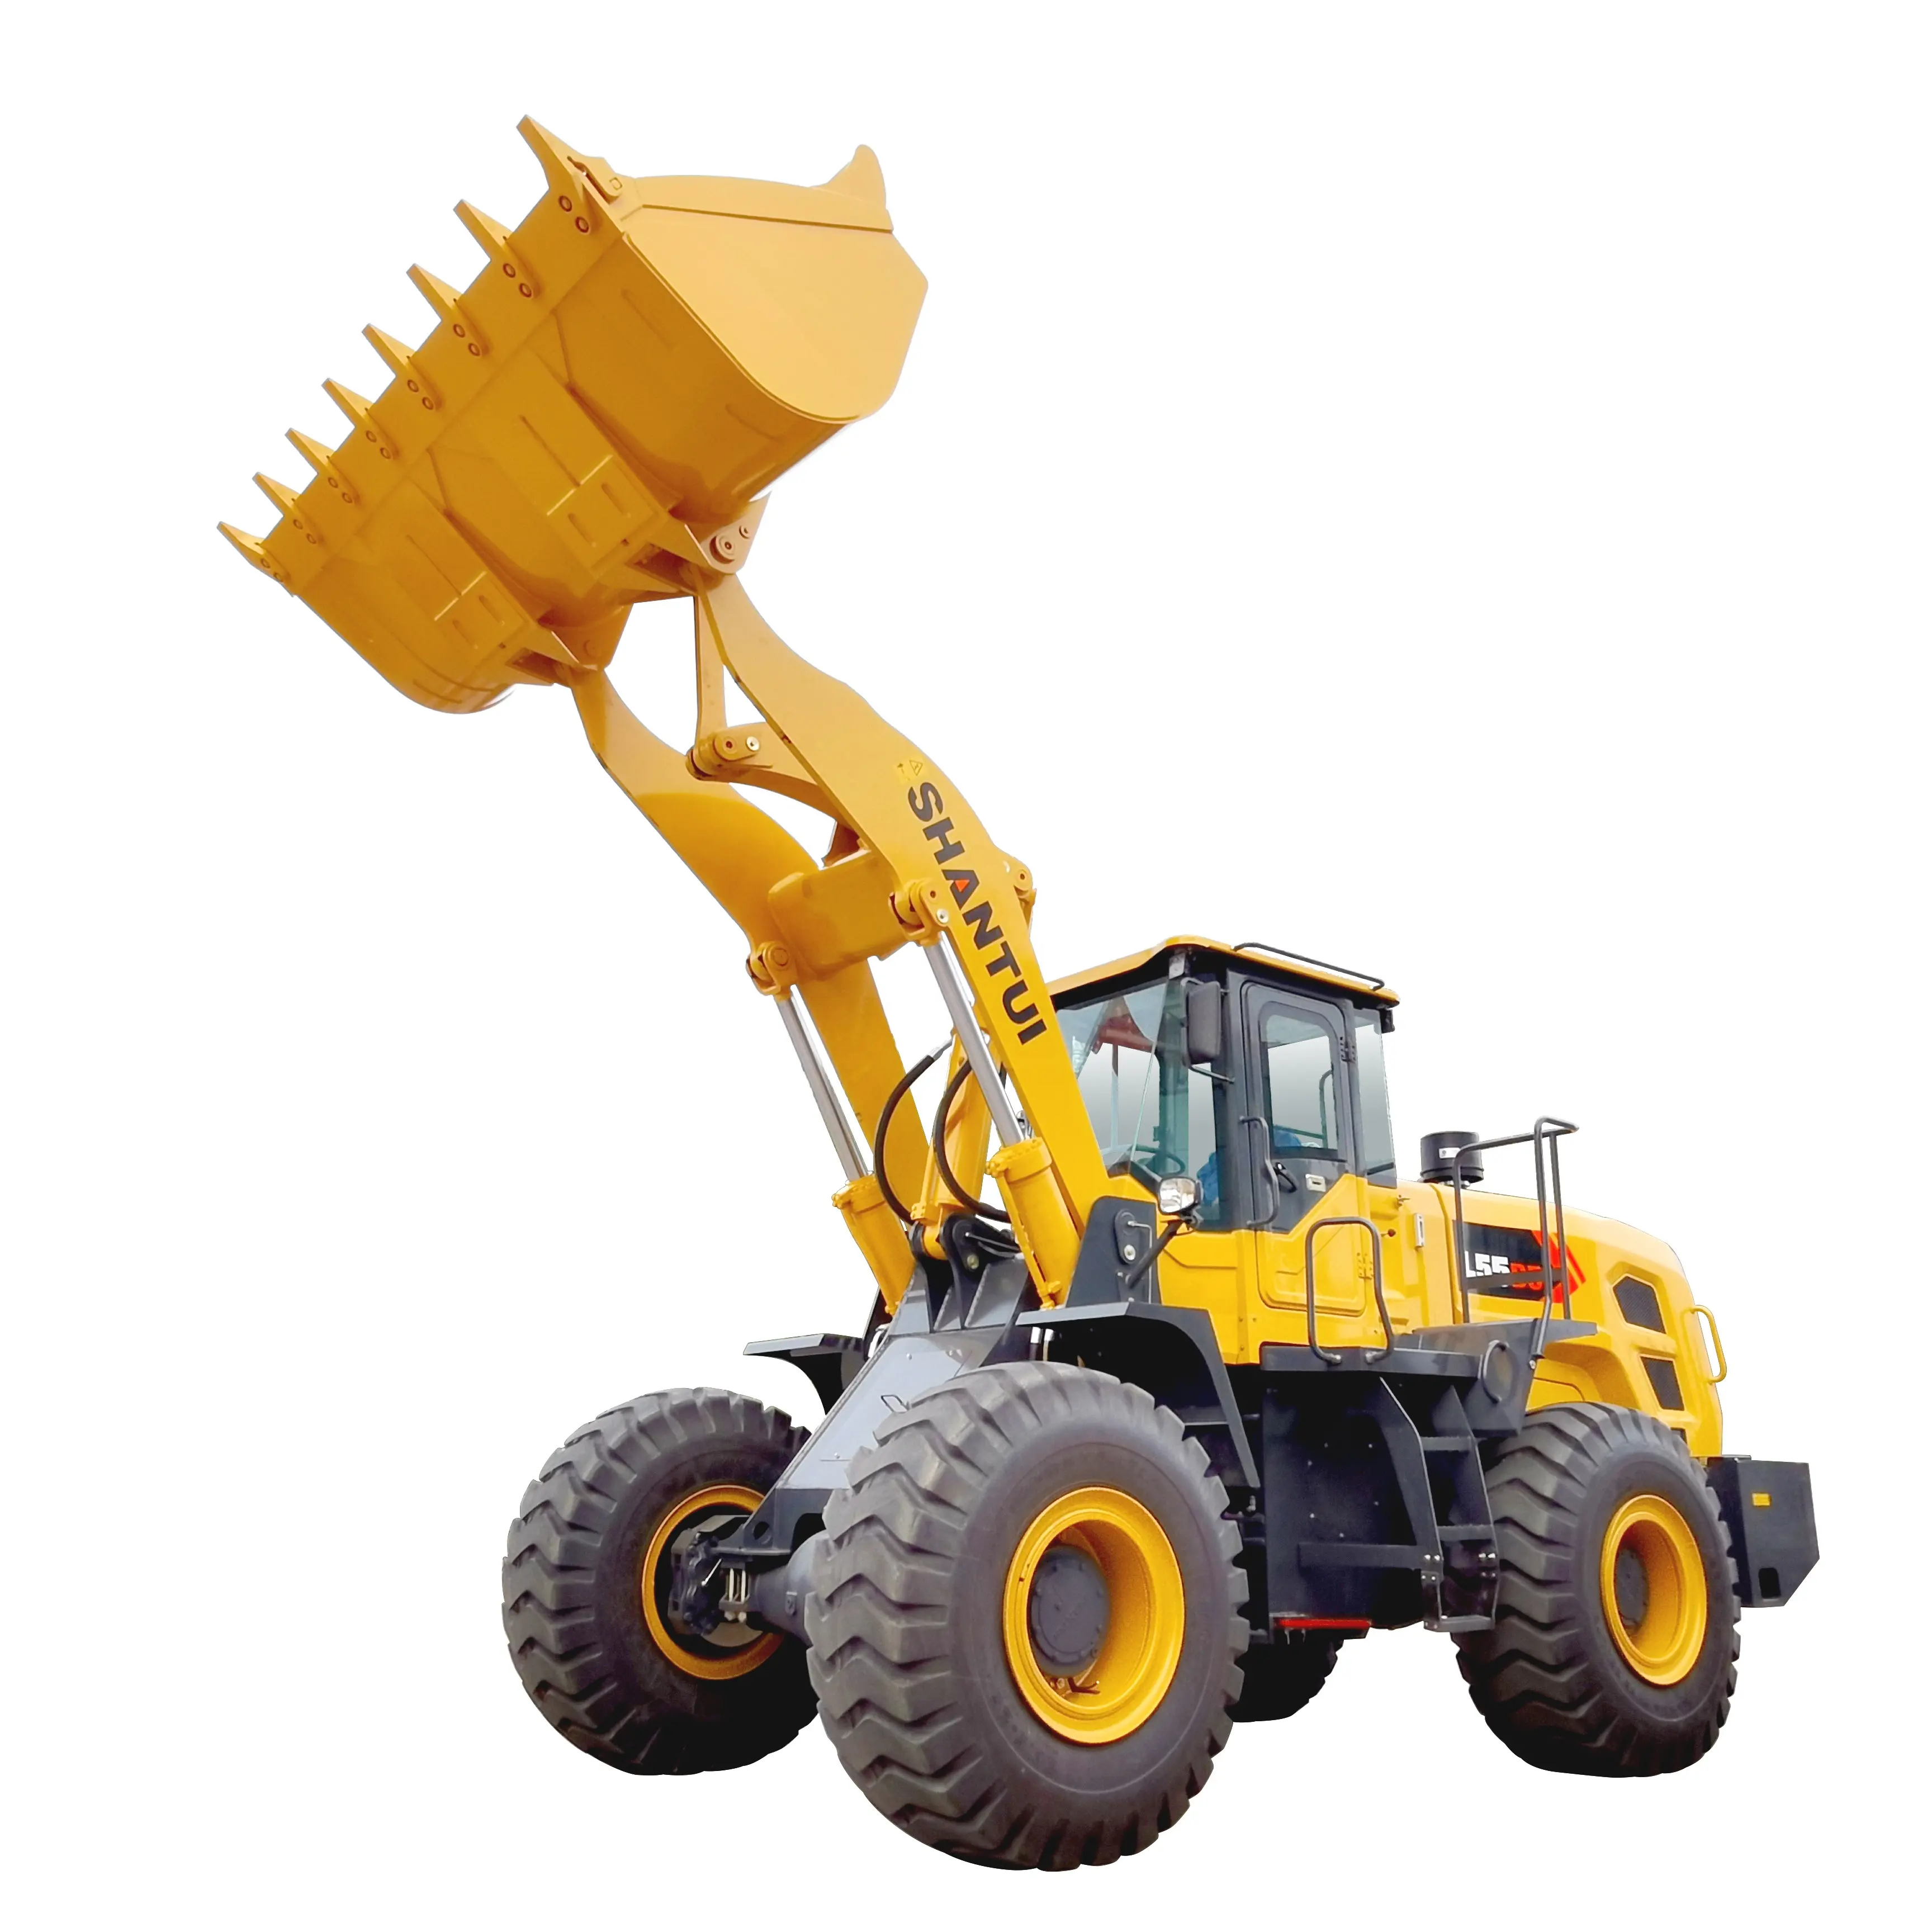 China Top Brand New SHANTUI Wheel Loader L55-B5 with Spare Parts